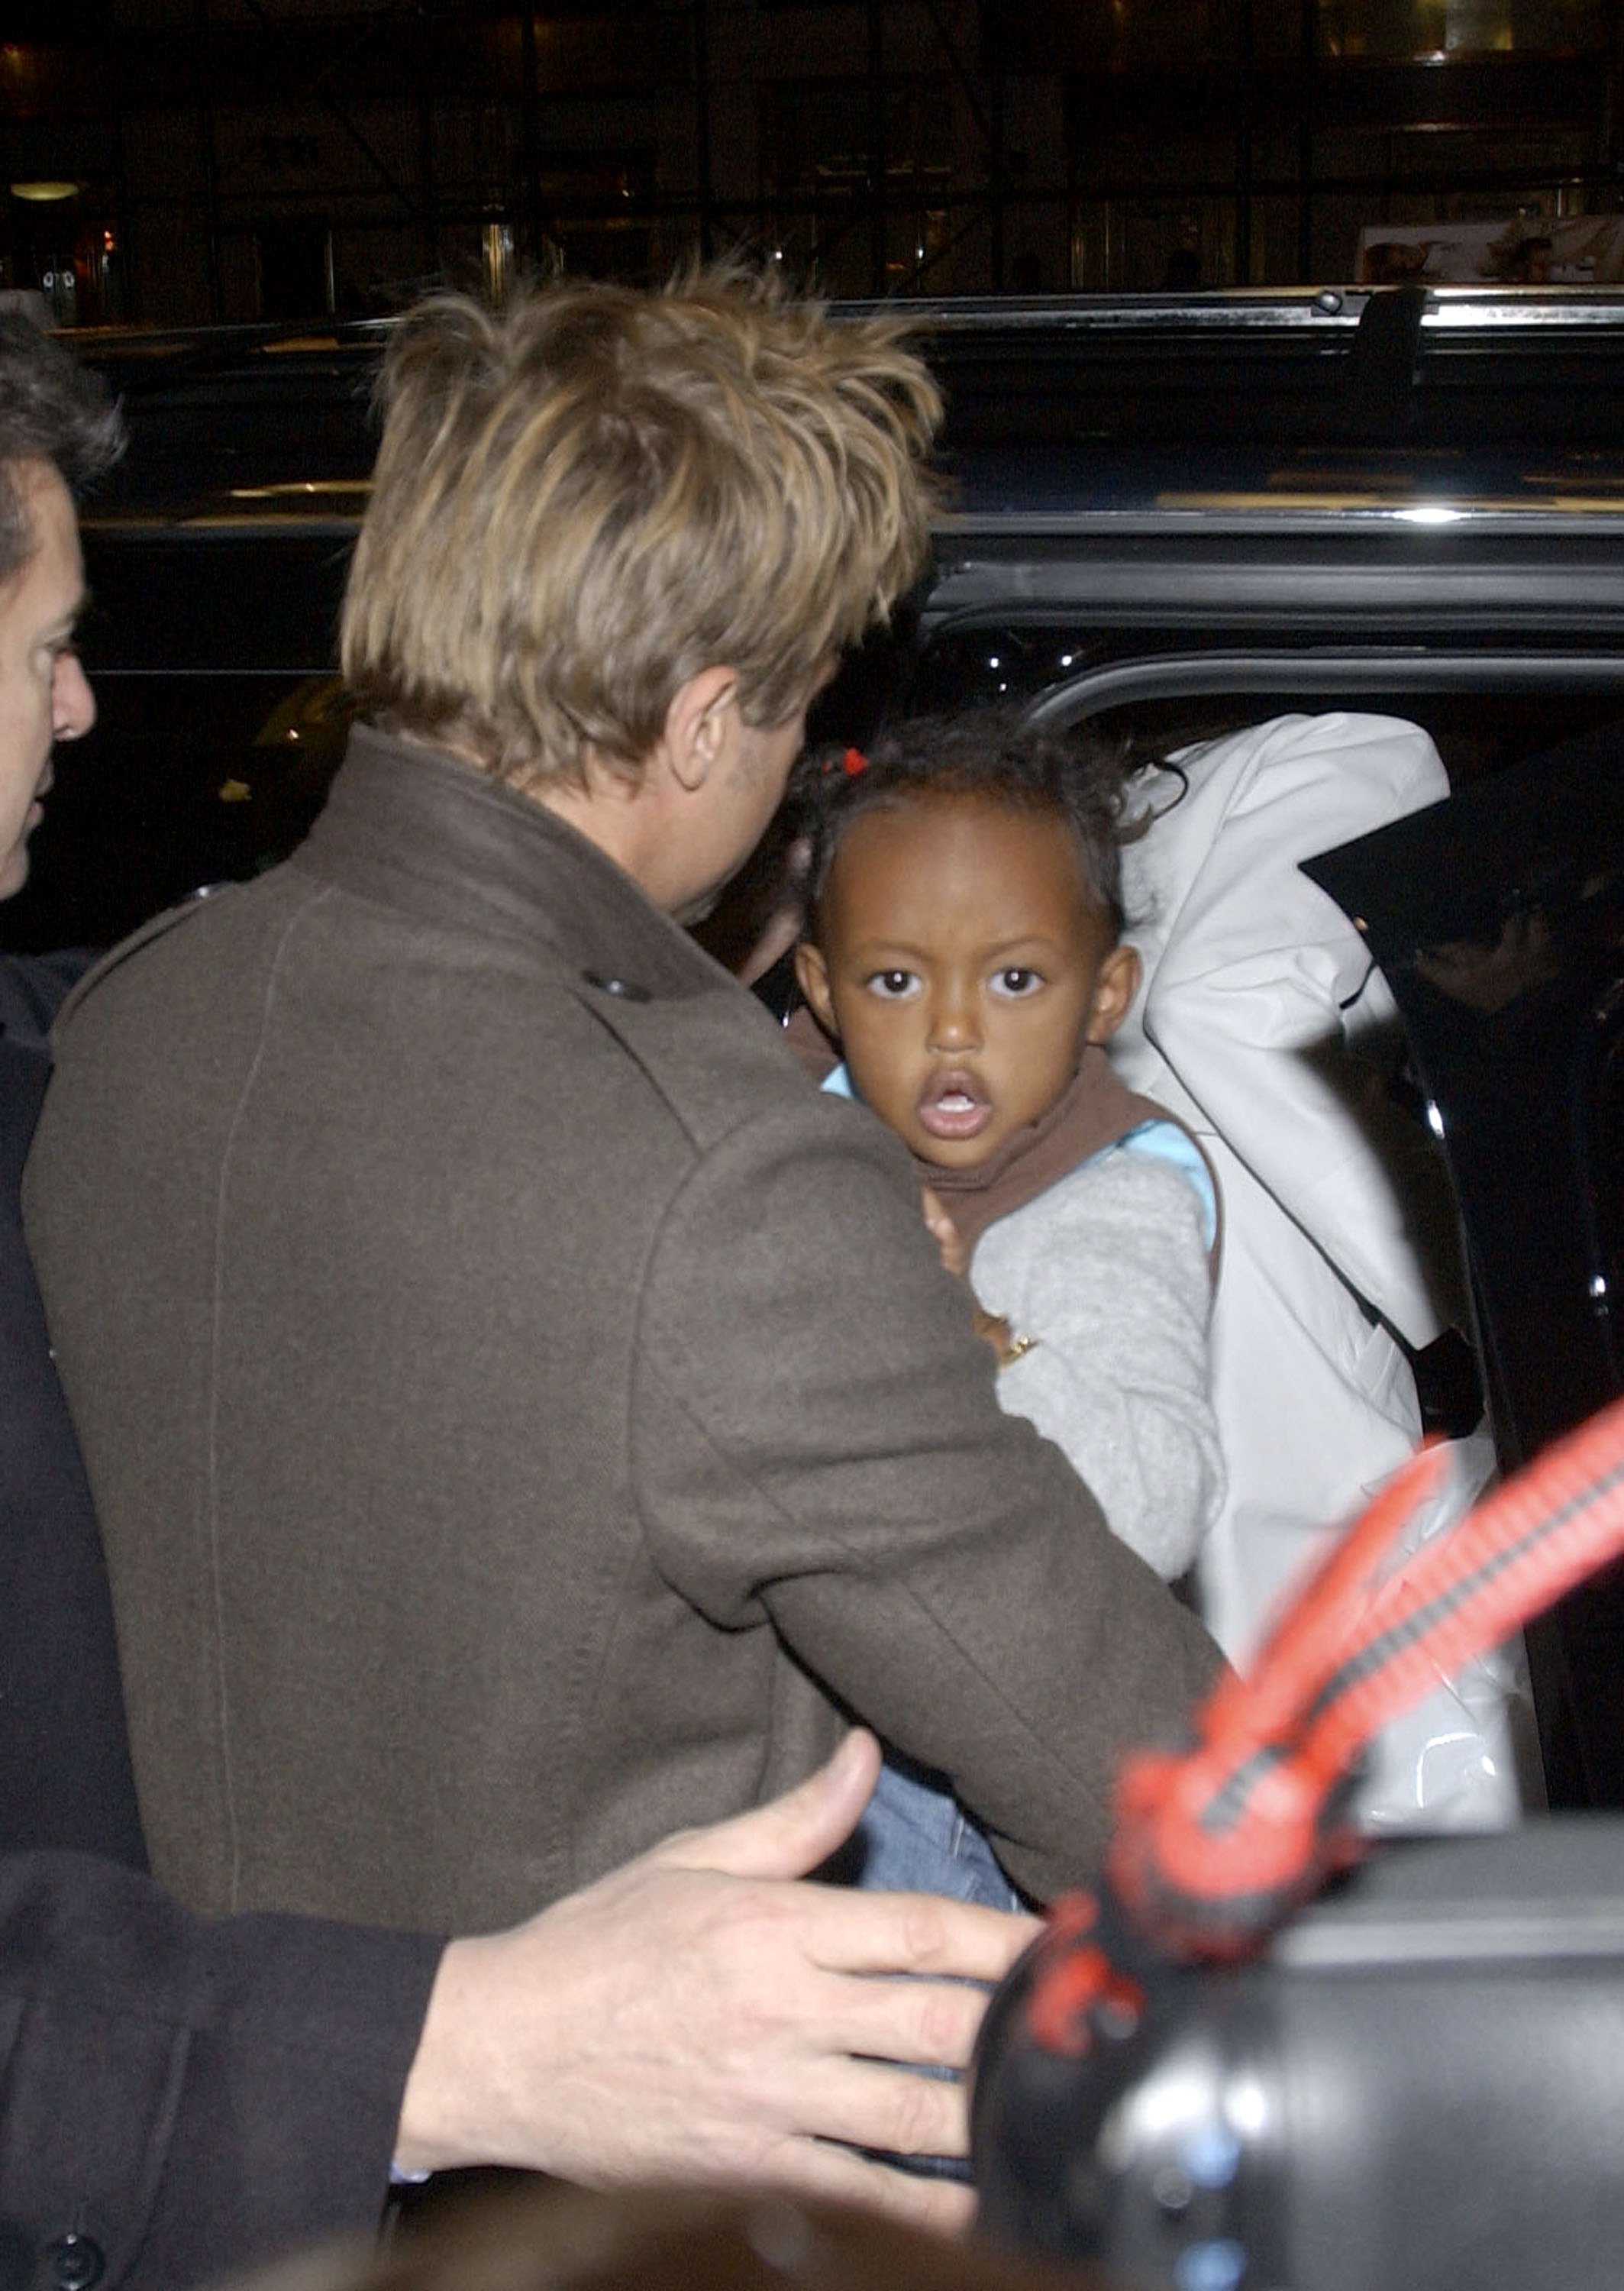 The girl is held by her dad while leaving a toy store on 57th Street in New York City on December 8, 2006 | Source: Getty Images